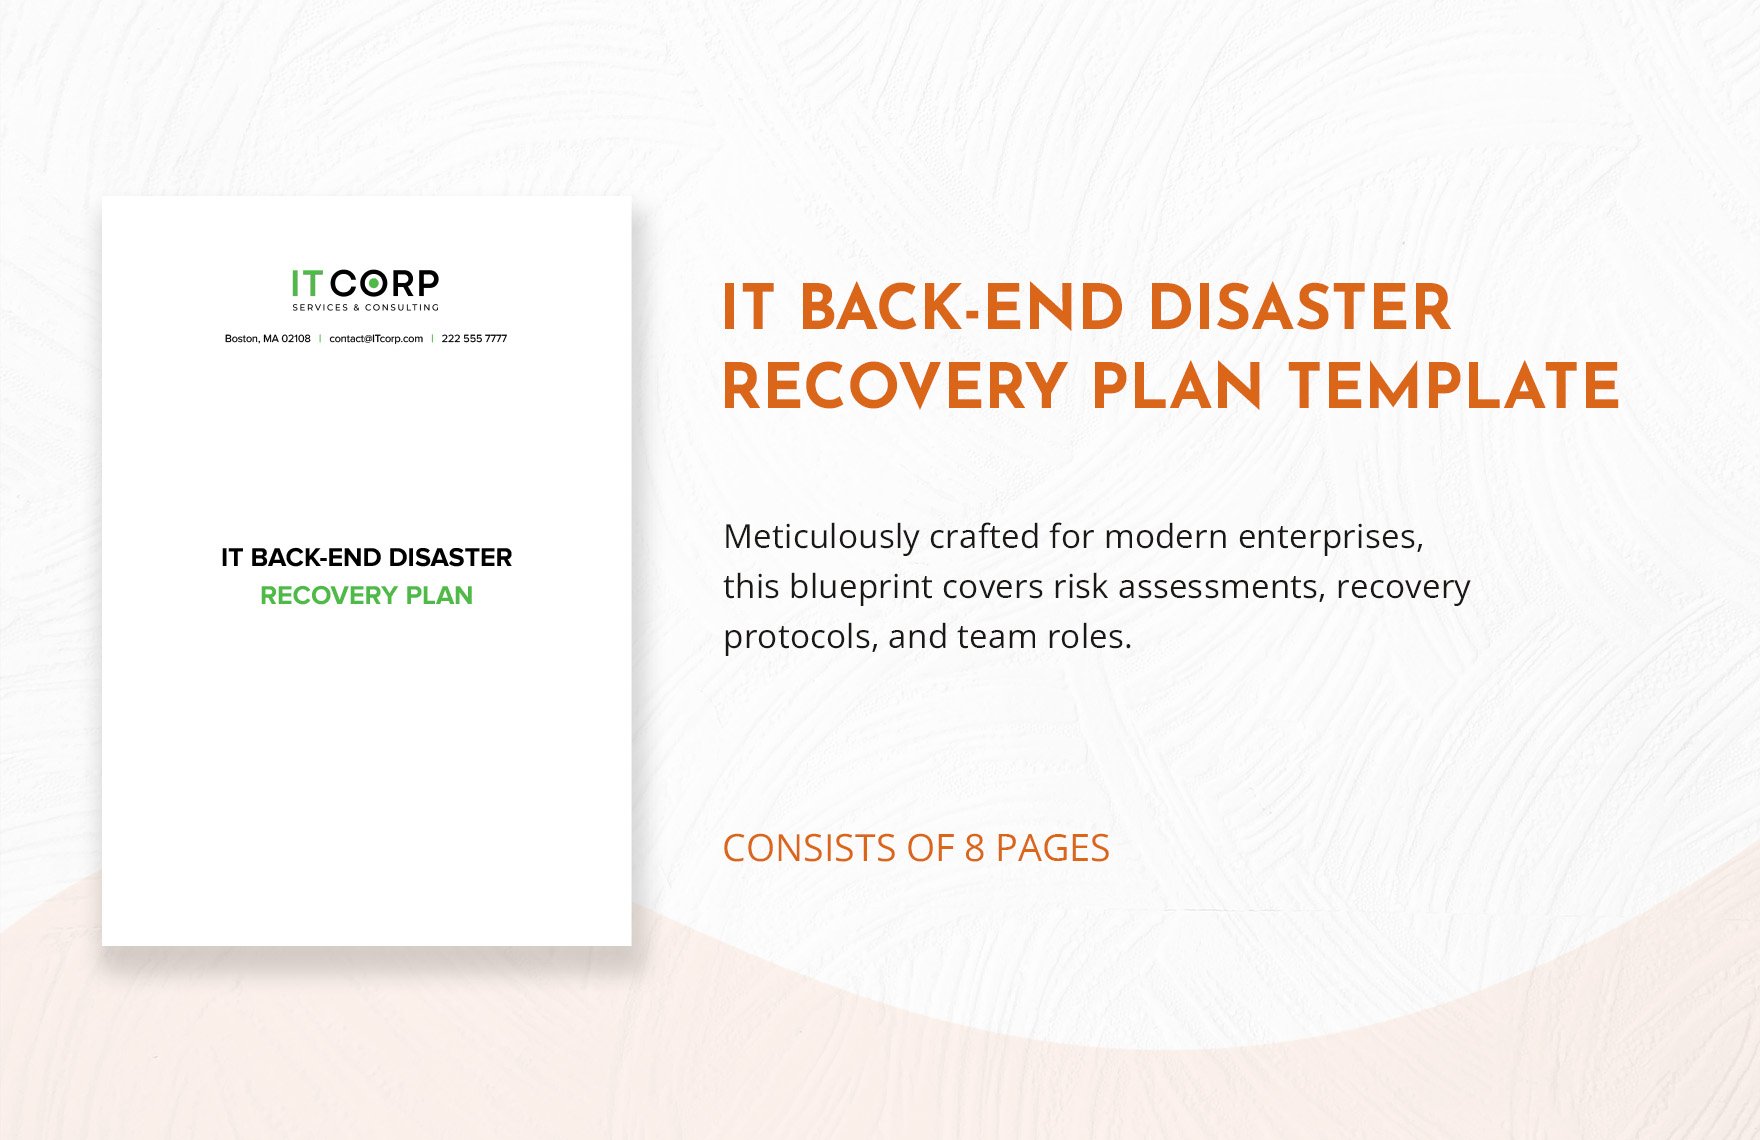 IT Back-End Disaster Recovery Plan Template